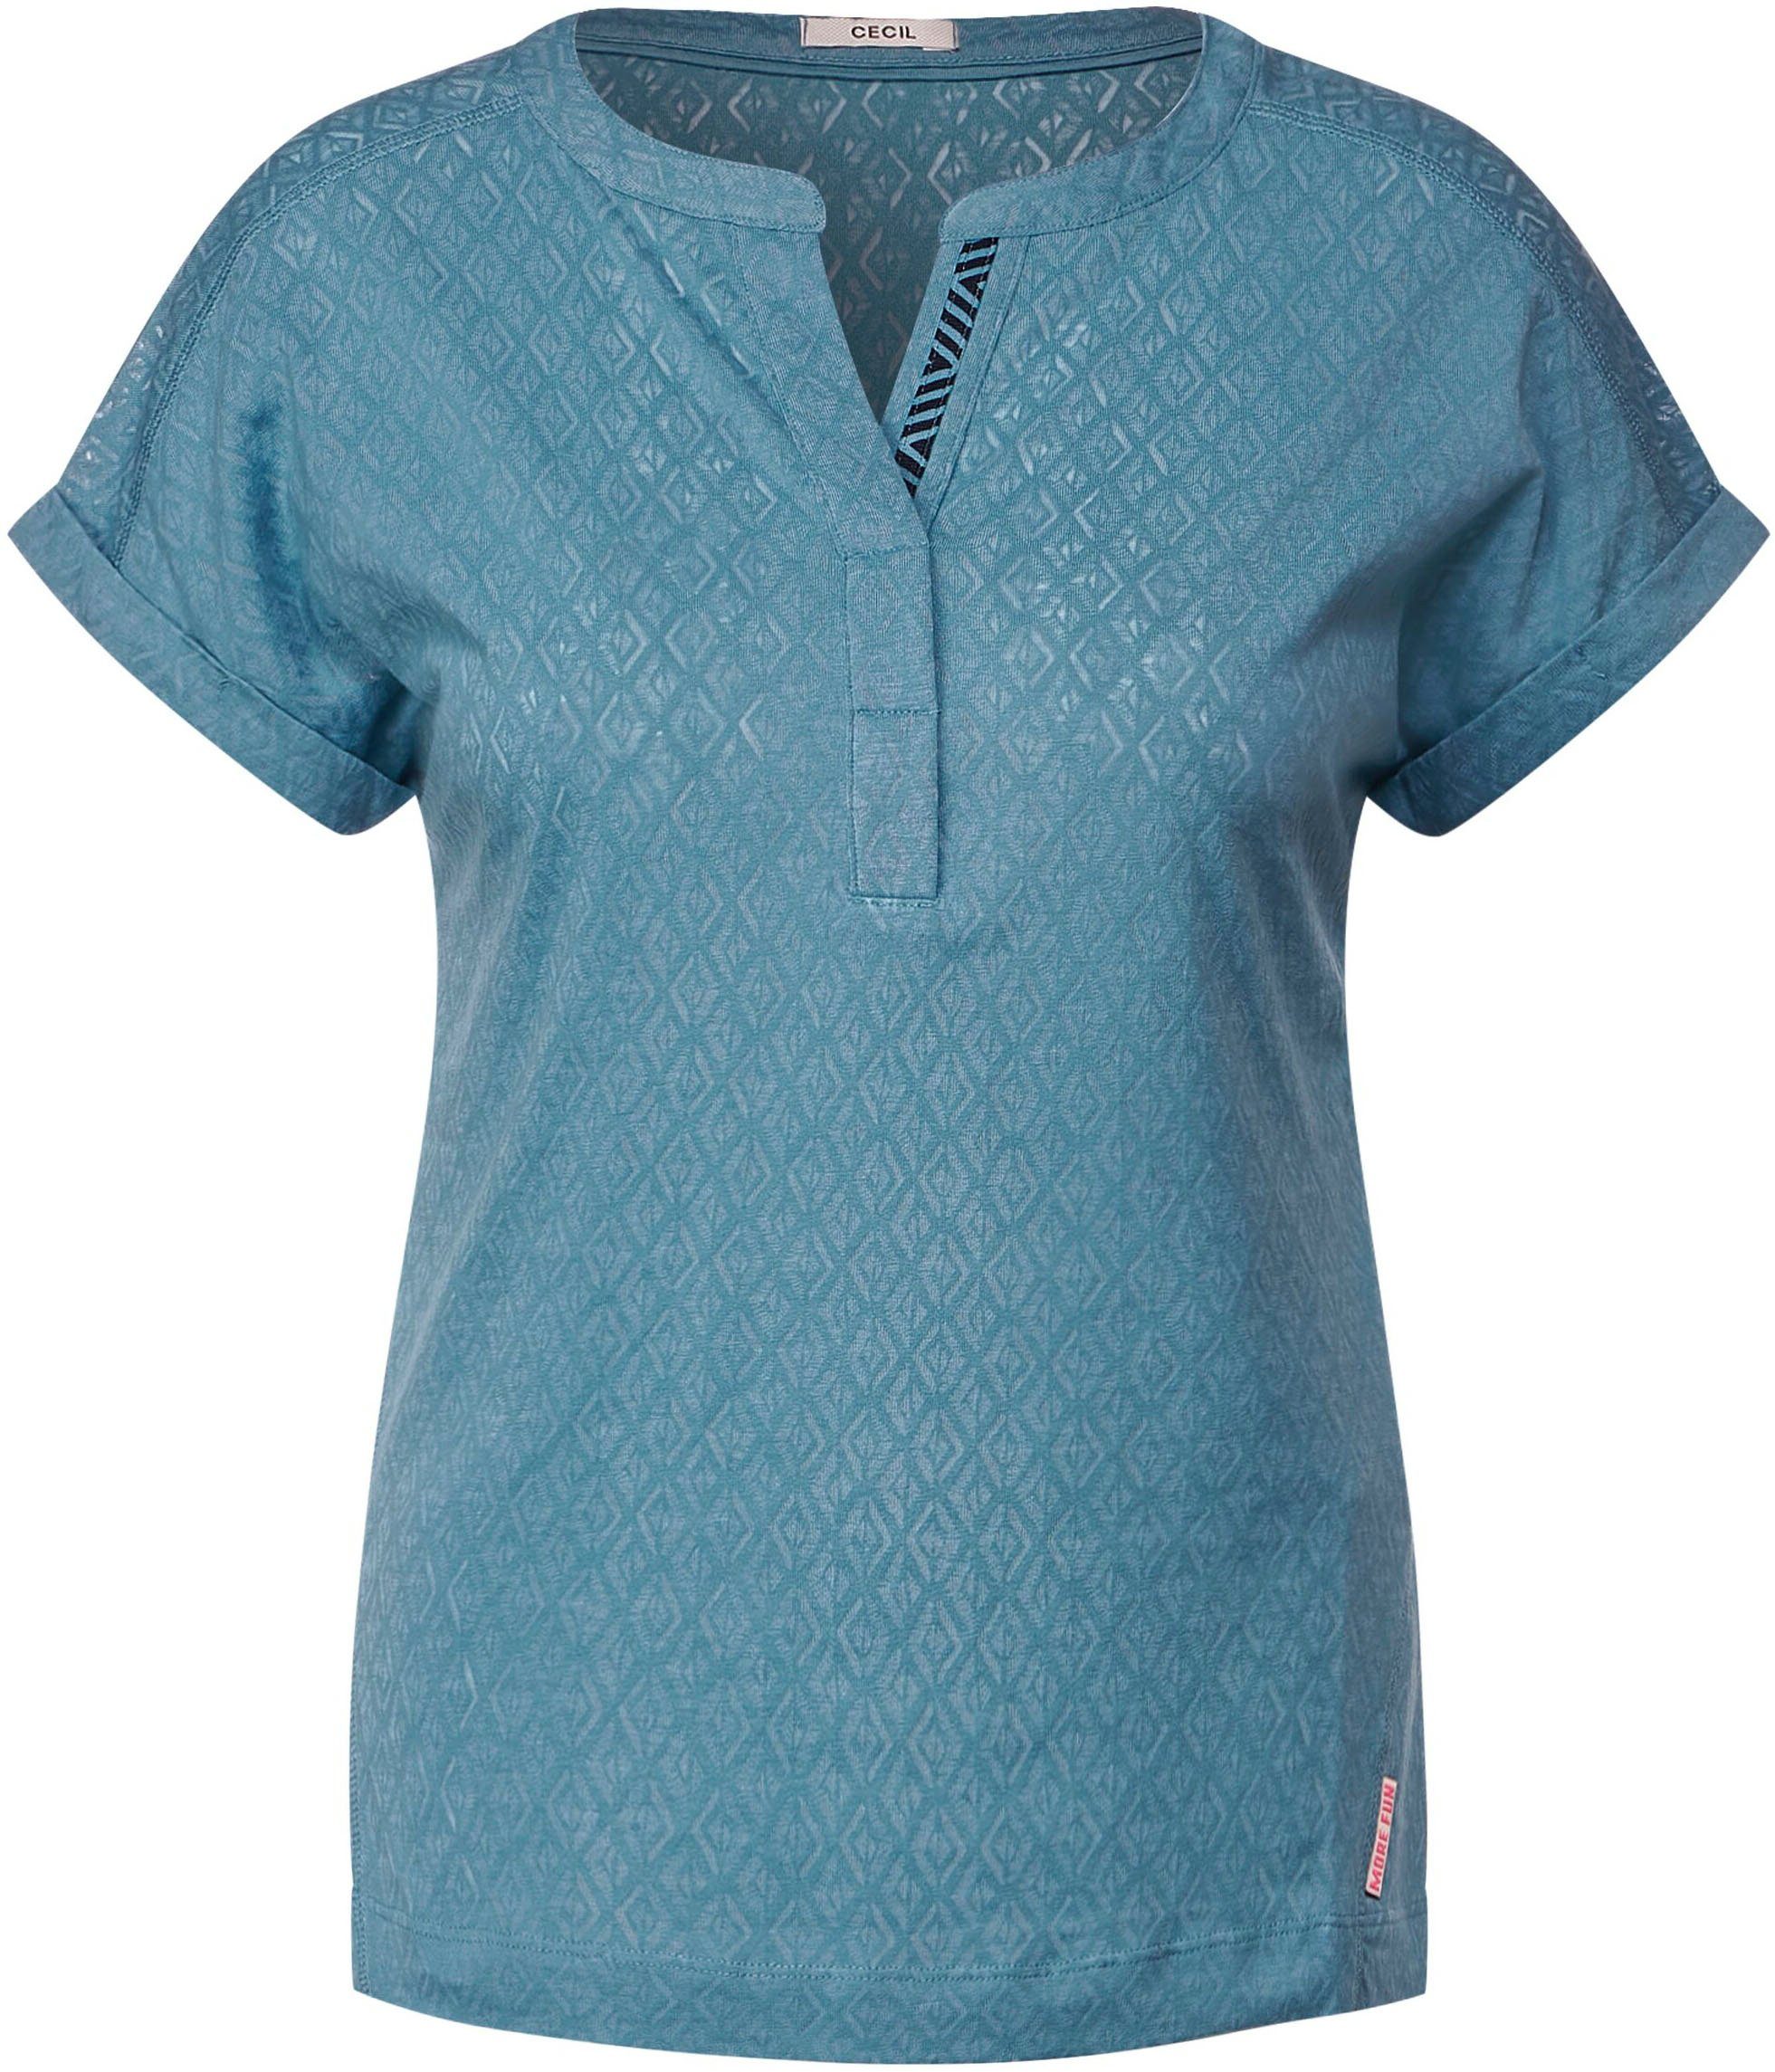 in T-Shirt Rhombusform adriatic blue Allover-Muster mit Cecil